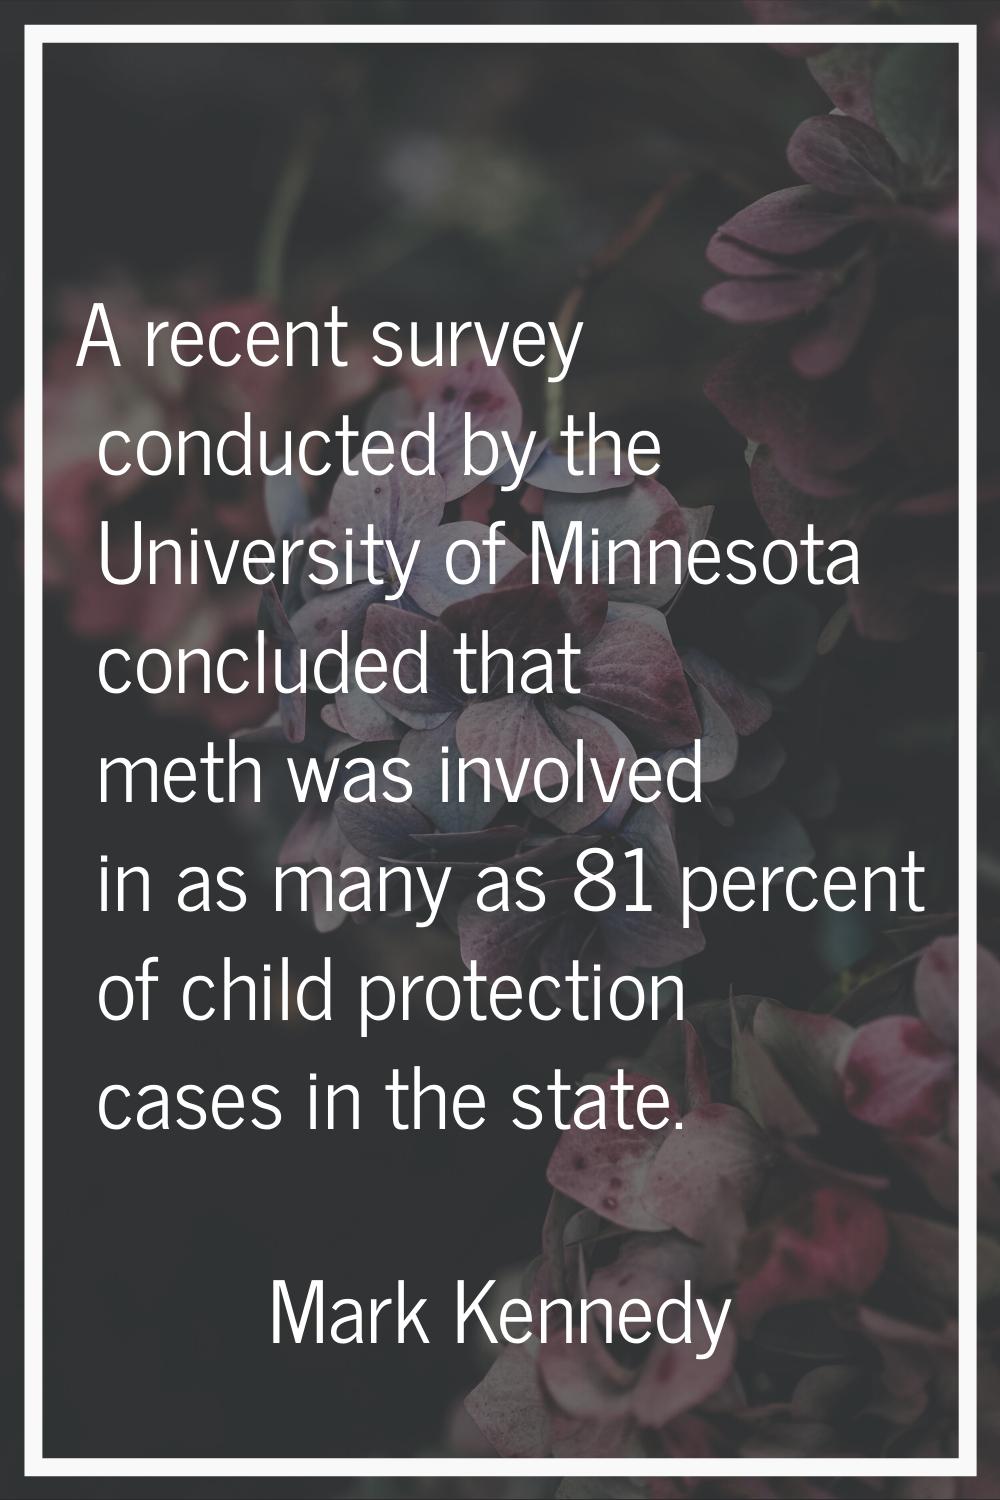 A recent survey conducted by the University of Minnesota concluded that meth was involved in as man